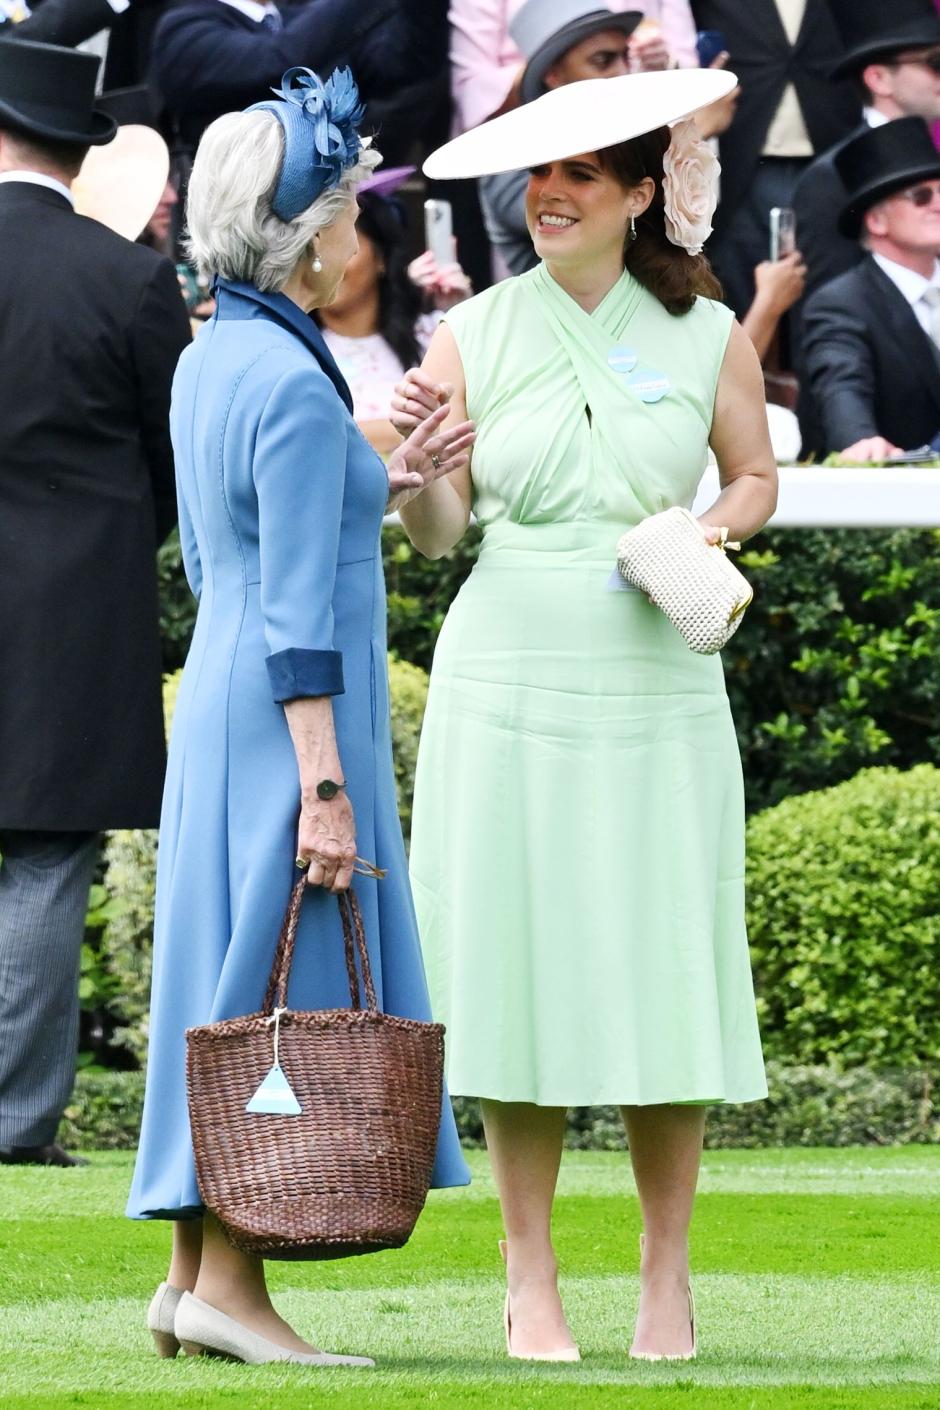 Mandatory Credit: Photo by James Veysey/Shutterstock (14544286au)
Princess Eugenie and guest (L)
Royal Ascot, Day 1, Ascot Racecourse, Ascot, UK - 18 Jun 2024 *** Local Caption *** .